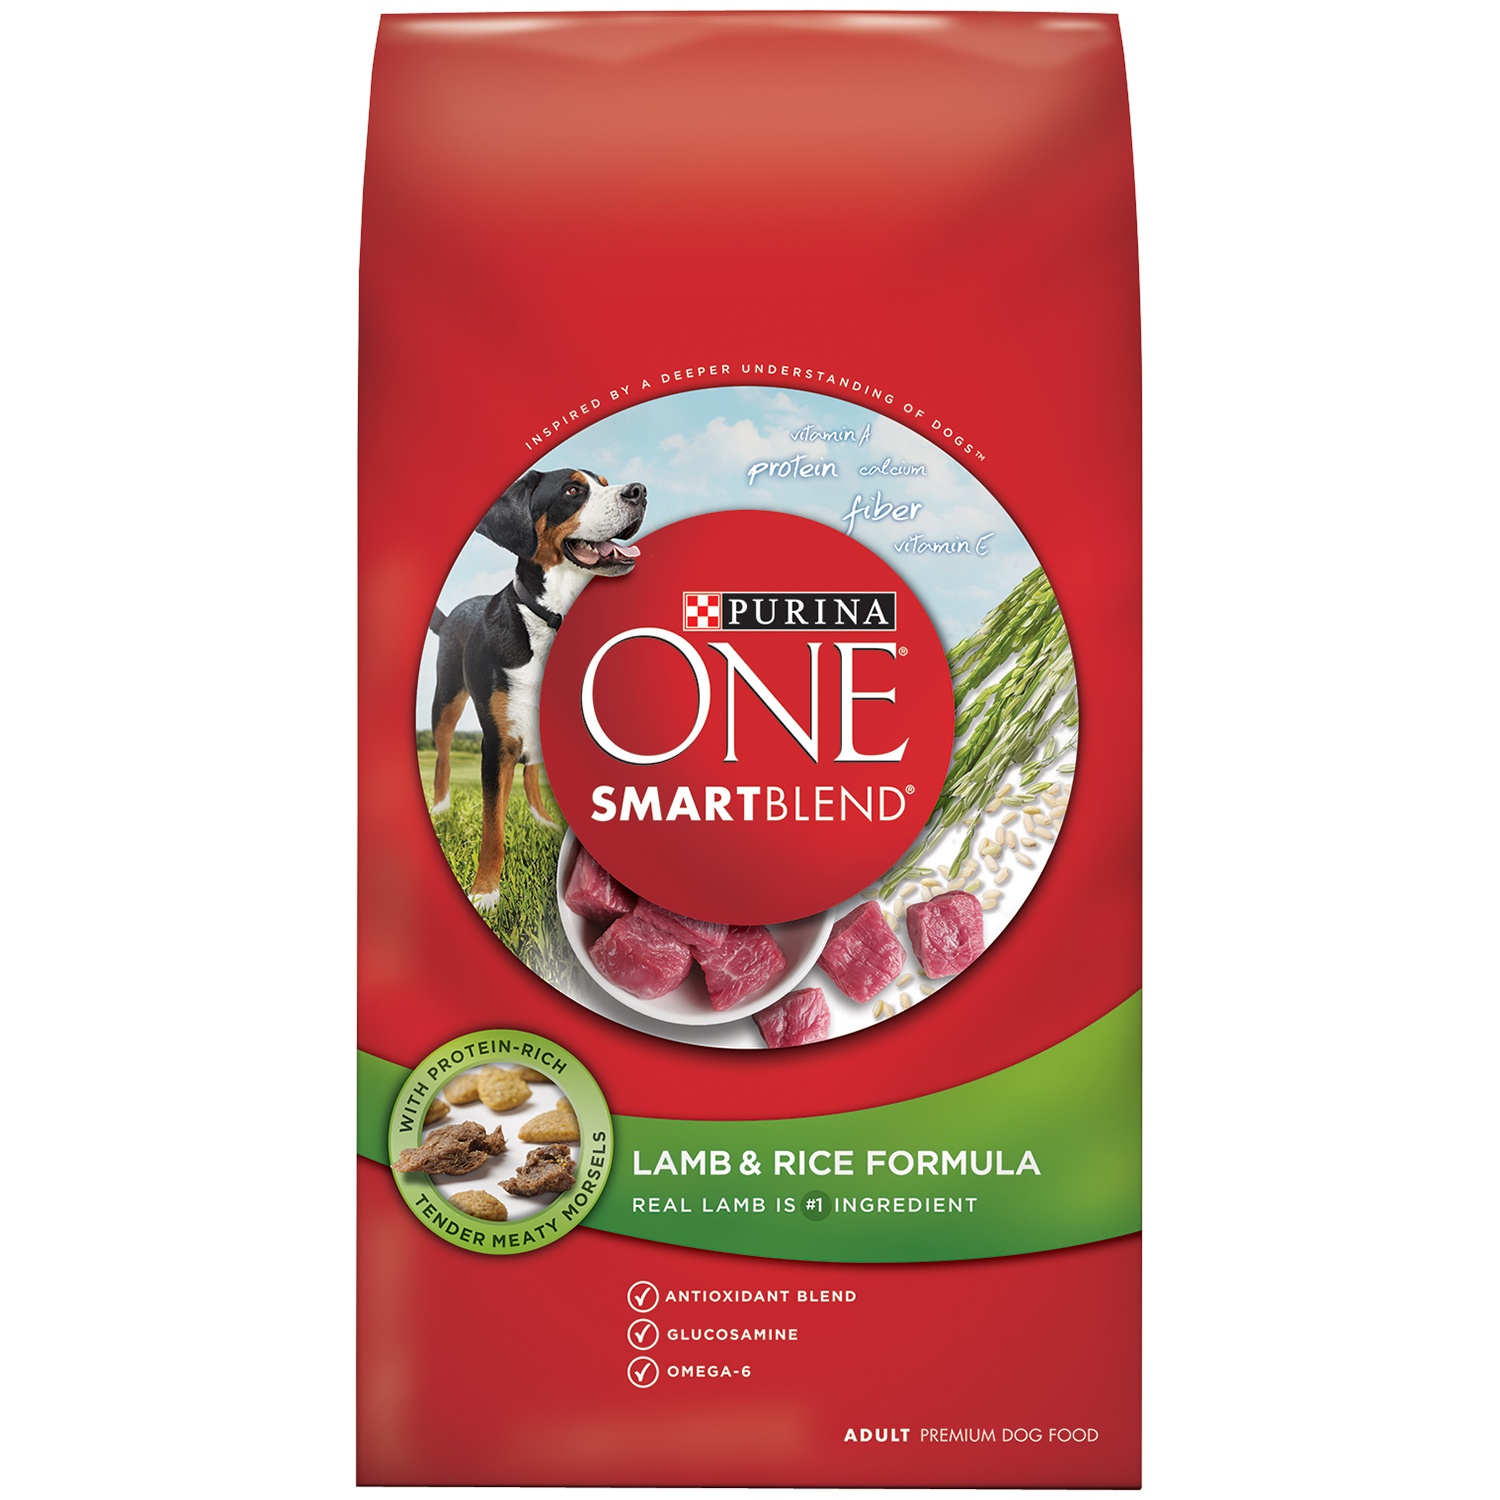 Purina One Smart Blend Dog Food For $2.50 At Family Dollar! - Free Printable Coupons For Purina One Dog Food